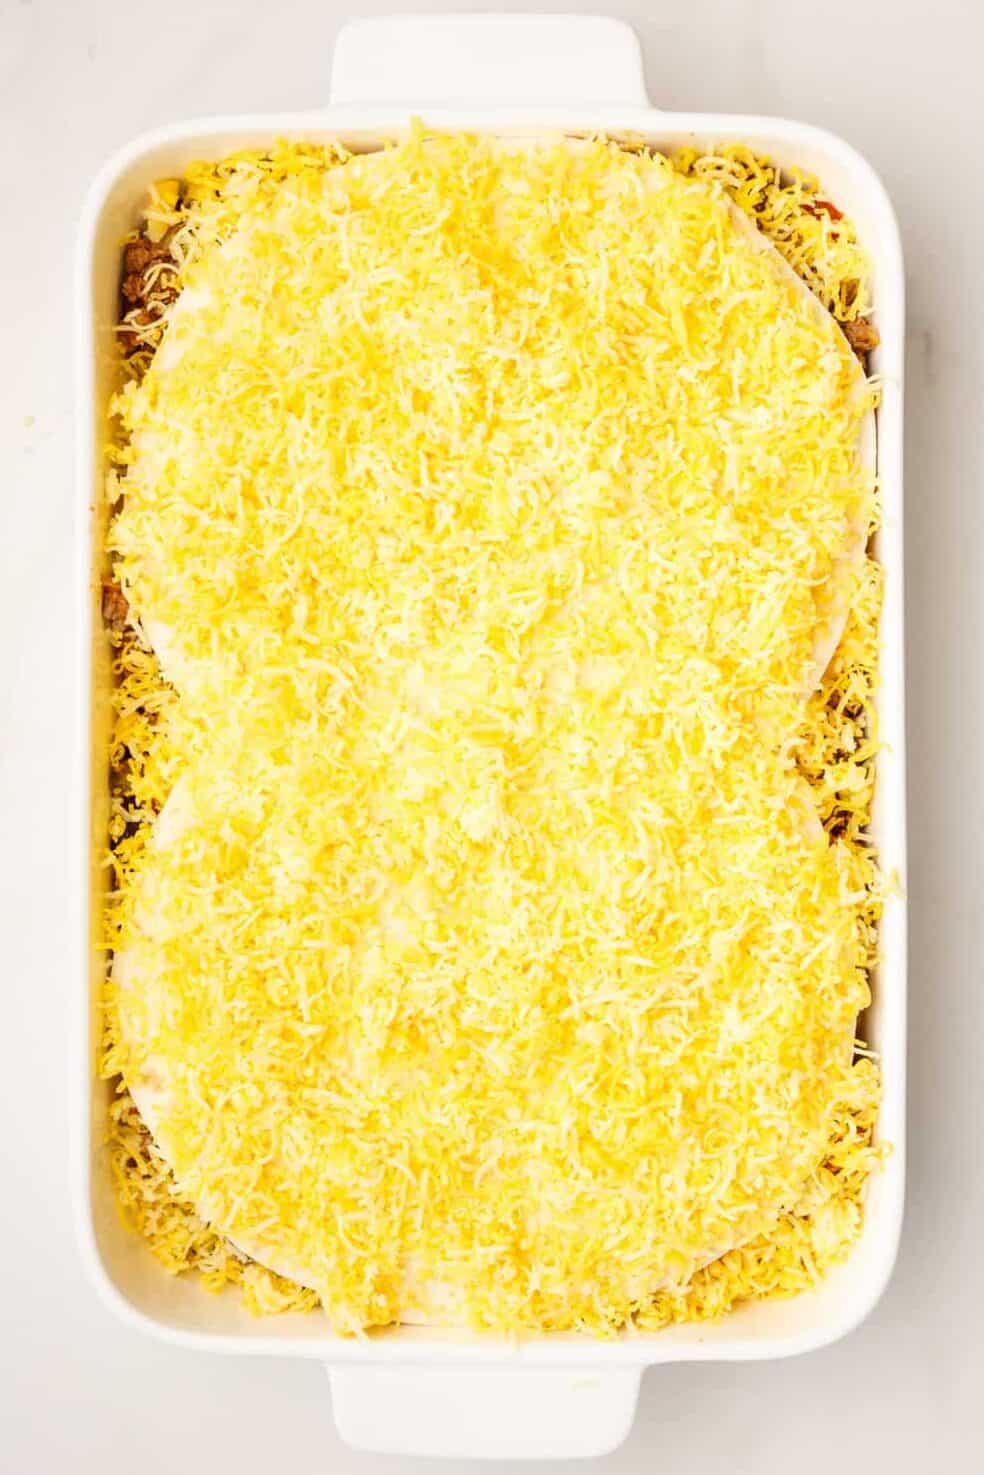 9x13 casserole dish with unbaked taco lasagna. the image shows two tortillas covered in shredded mexican cheese layered to the top.